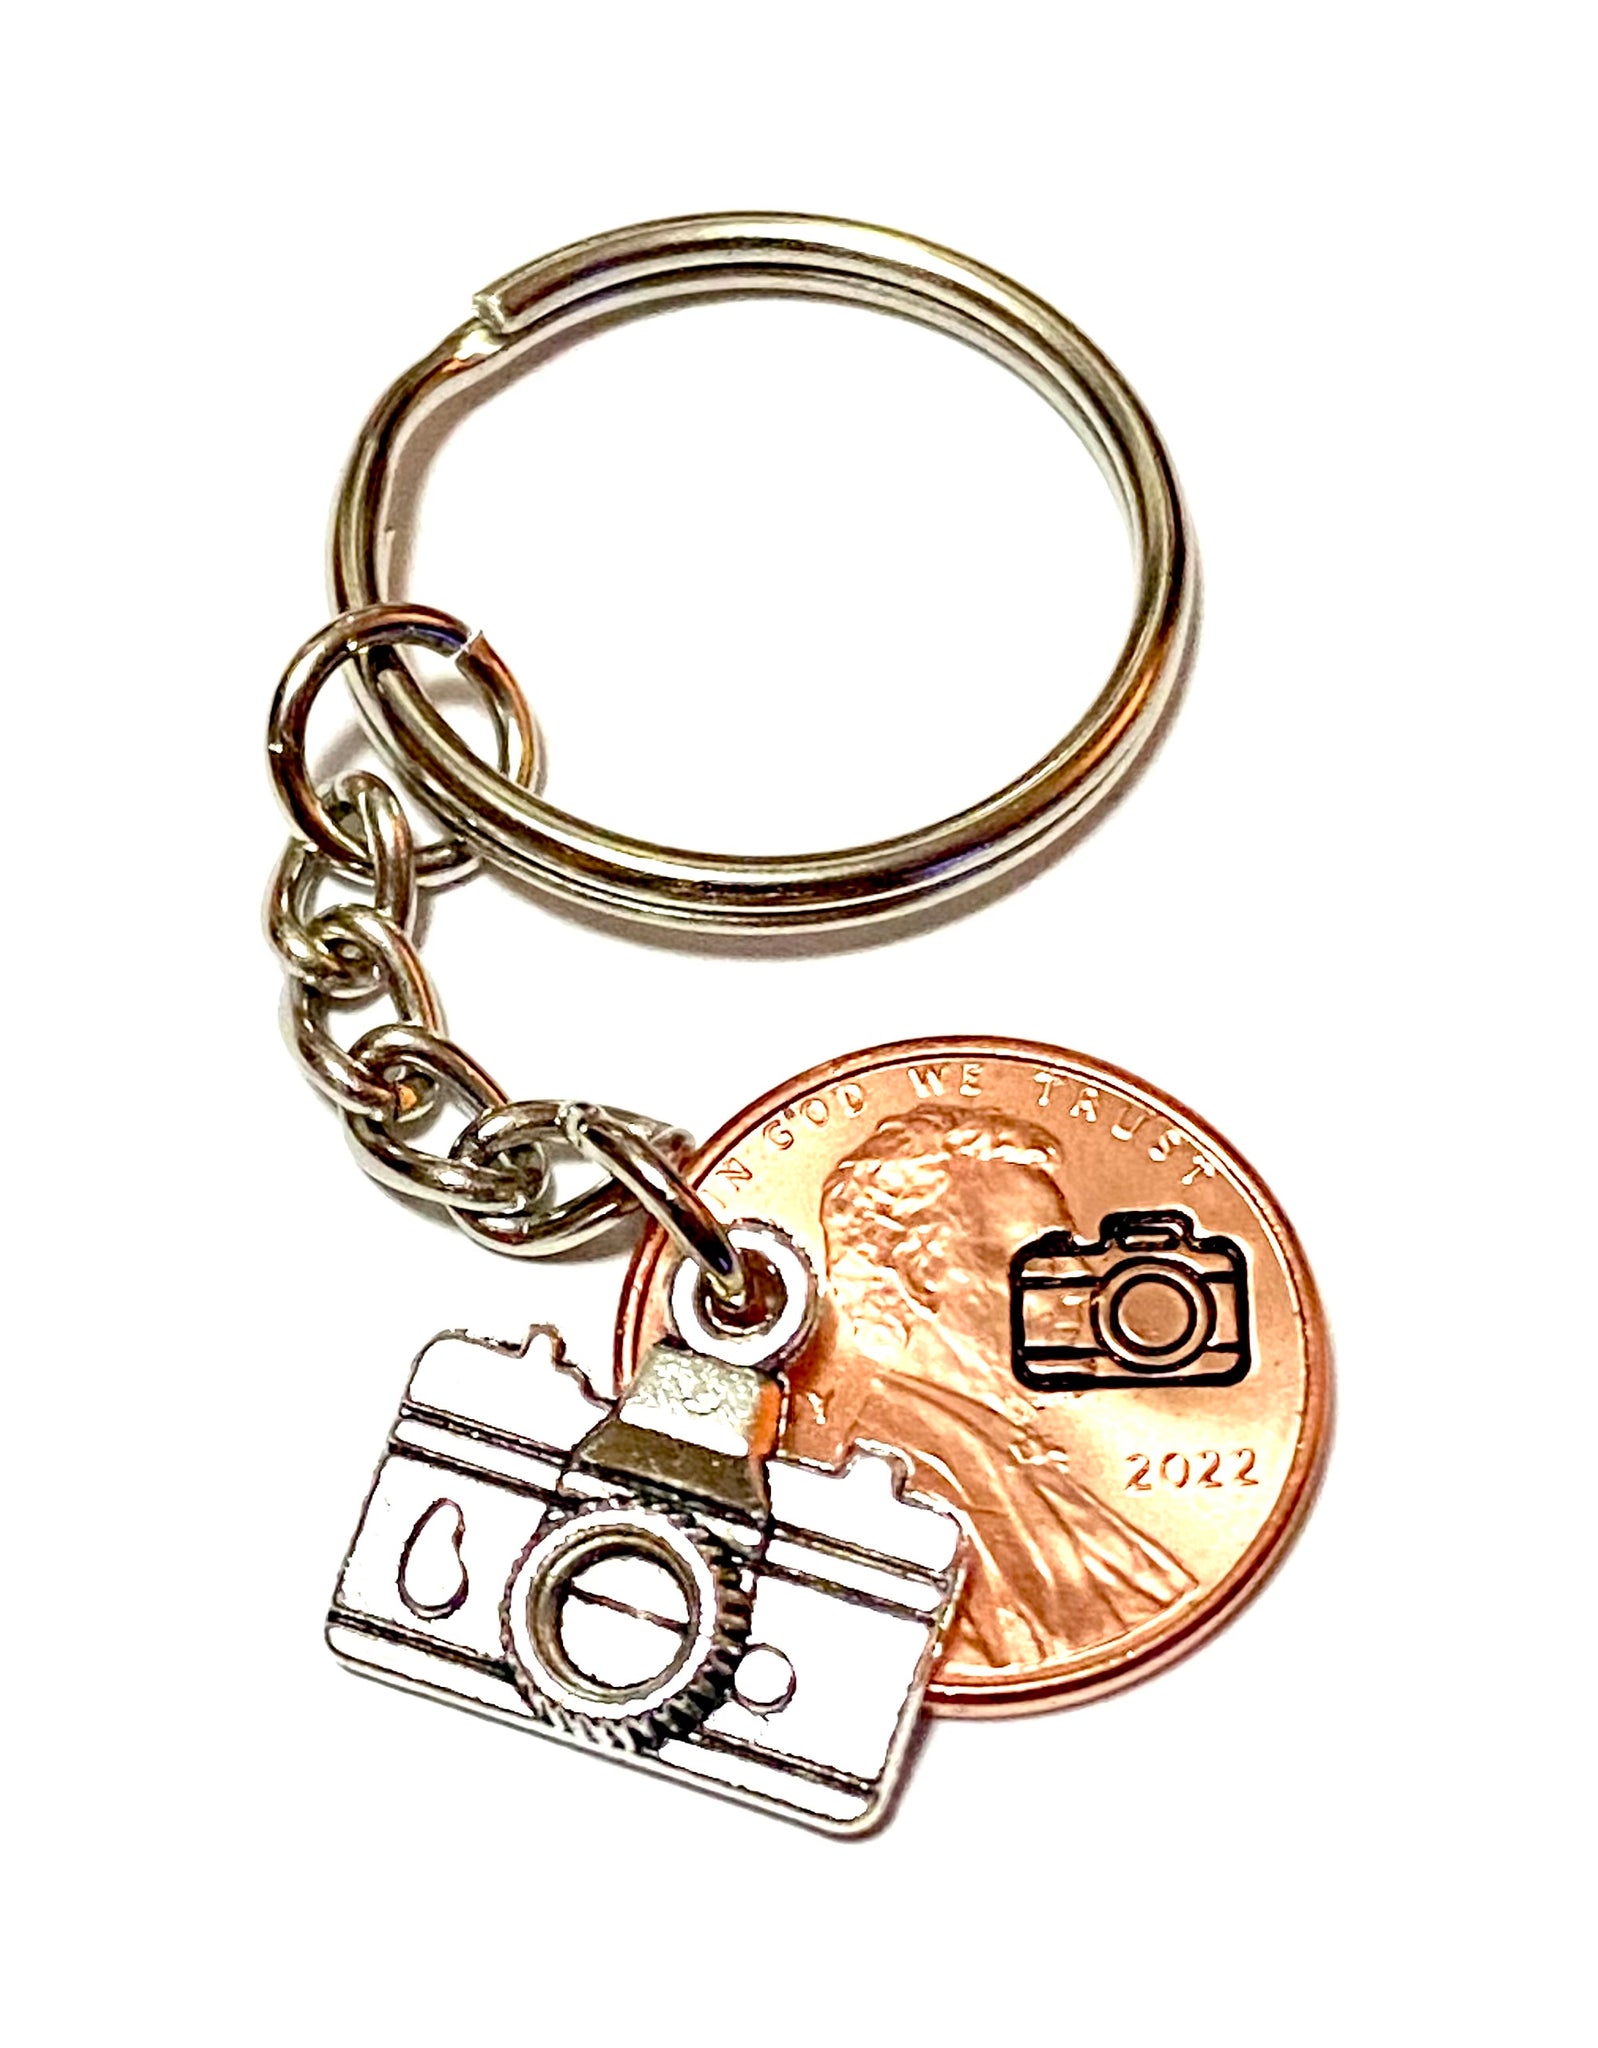 A photography inspired keychain with a silver camera charm attached to a Lincoln Cent with a camera design engraved above the date. It's an awesome Lucky Penny Keychain!